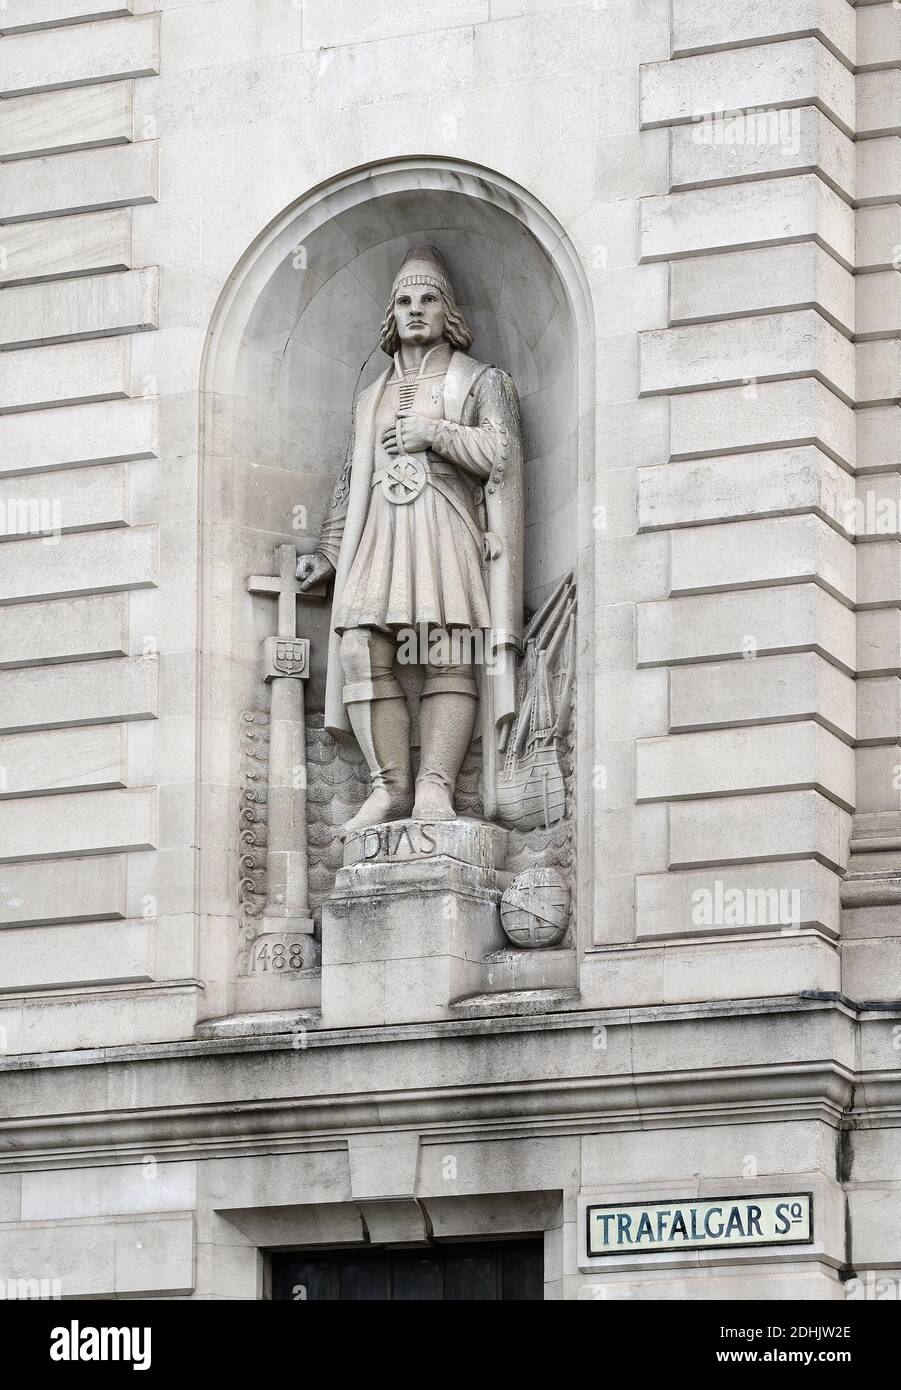 London, England, UK. Statue of Bartolomeu / Bartholemew Dias (Portugese explorer - first European known to have sailed around the Horn of Africa, 1488 Stock Photo